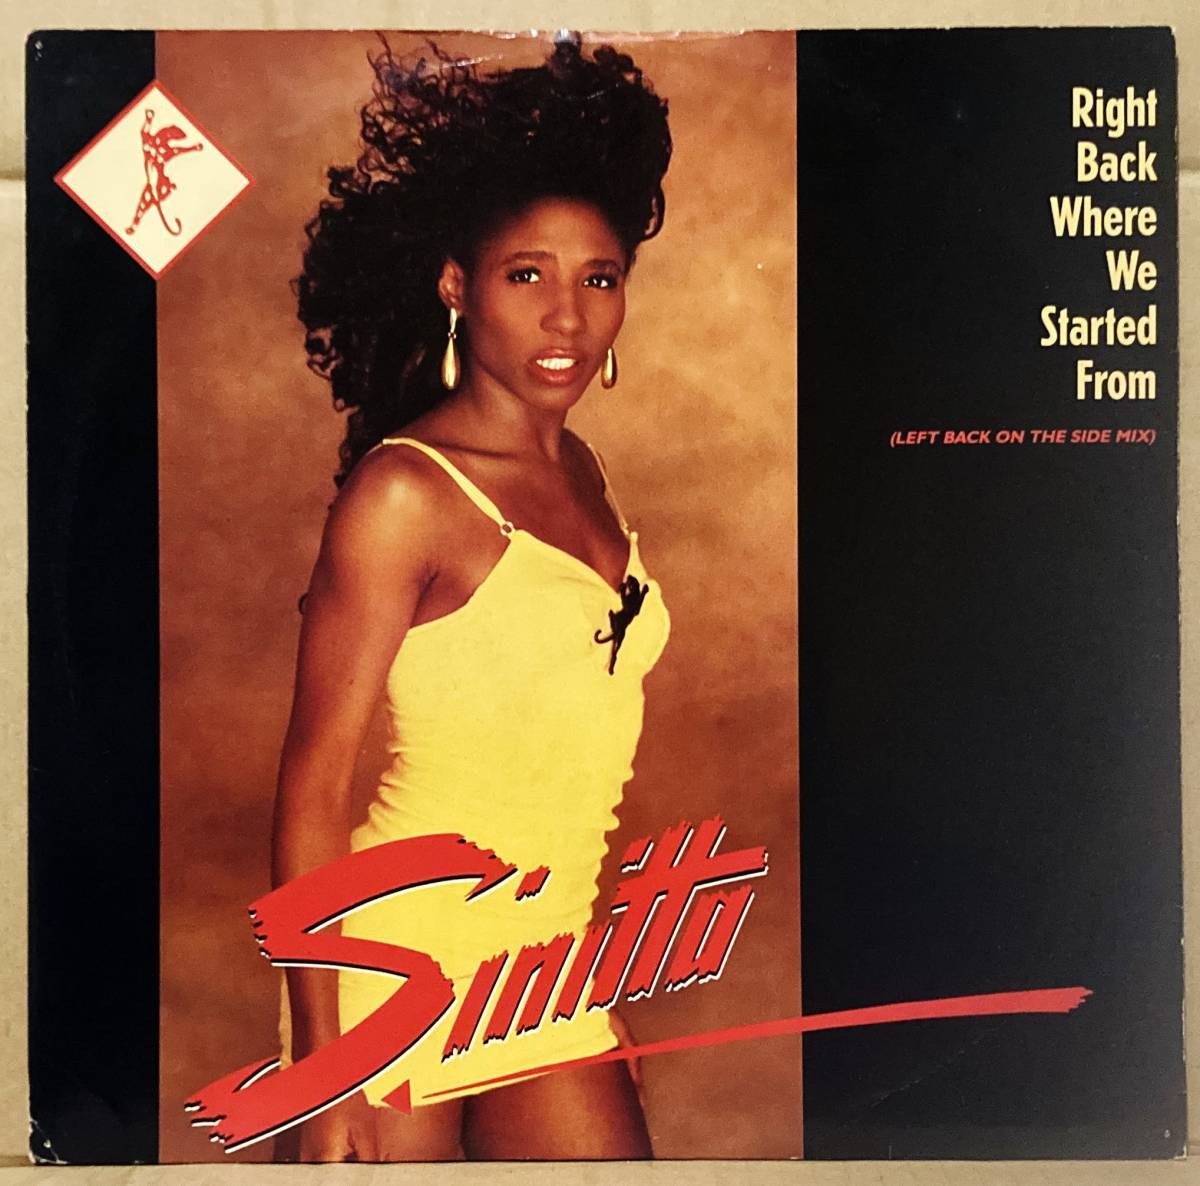 【12'/PWL】SINITTA / RIGHT BACK WHERE WE STARTED FROM ☆ シニータ / あの日にゲット・ライト・バックの画像1